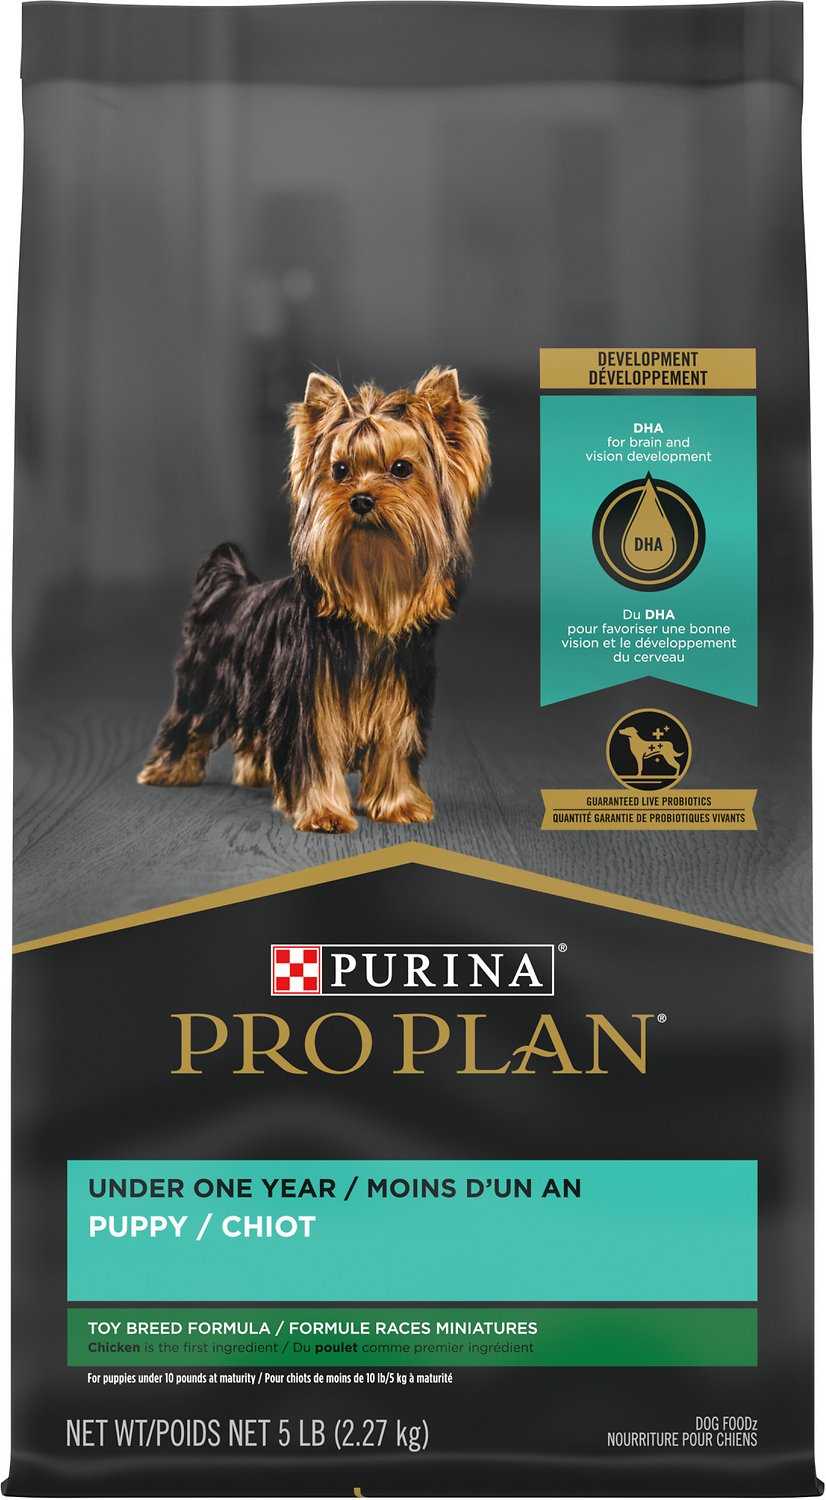 Purina Pro Plan Toy Breed Dry Dog Food With Probiotics for Dogs, Chicken  and Rice Formula - 5 lb. Bag